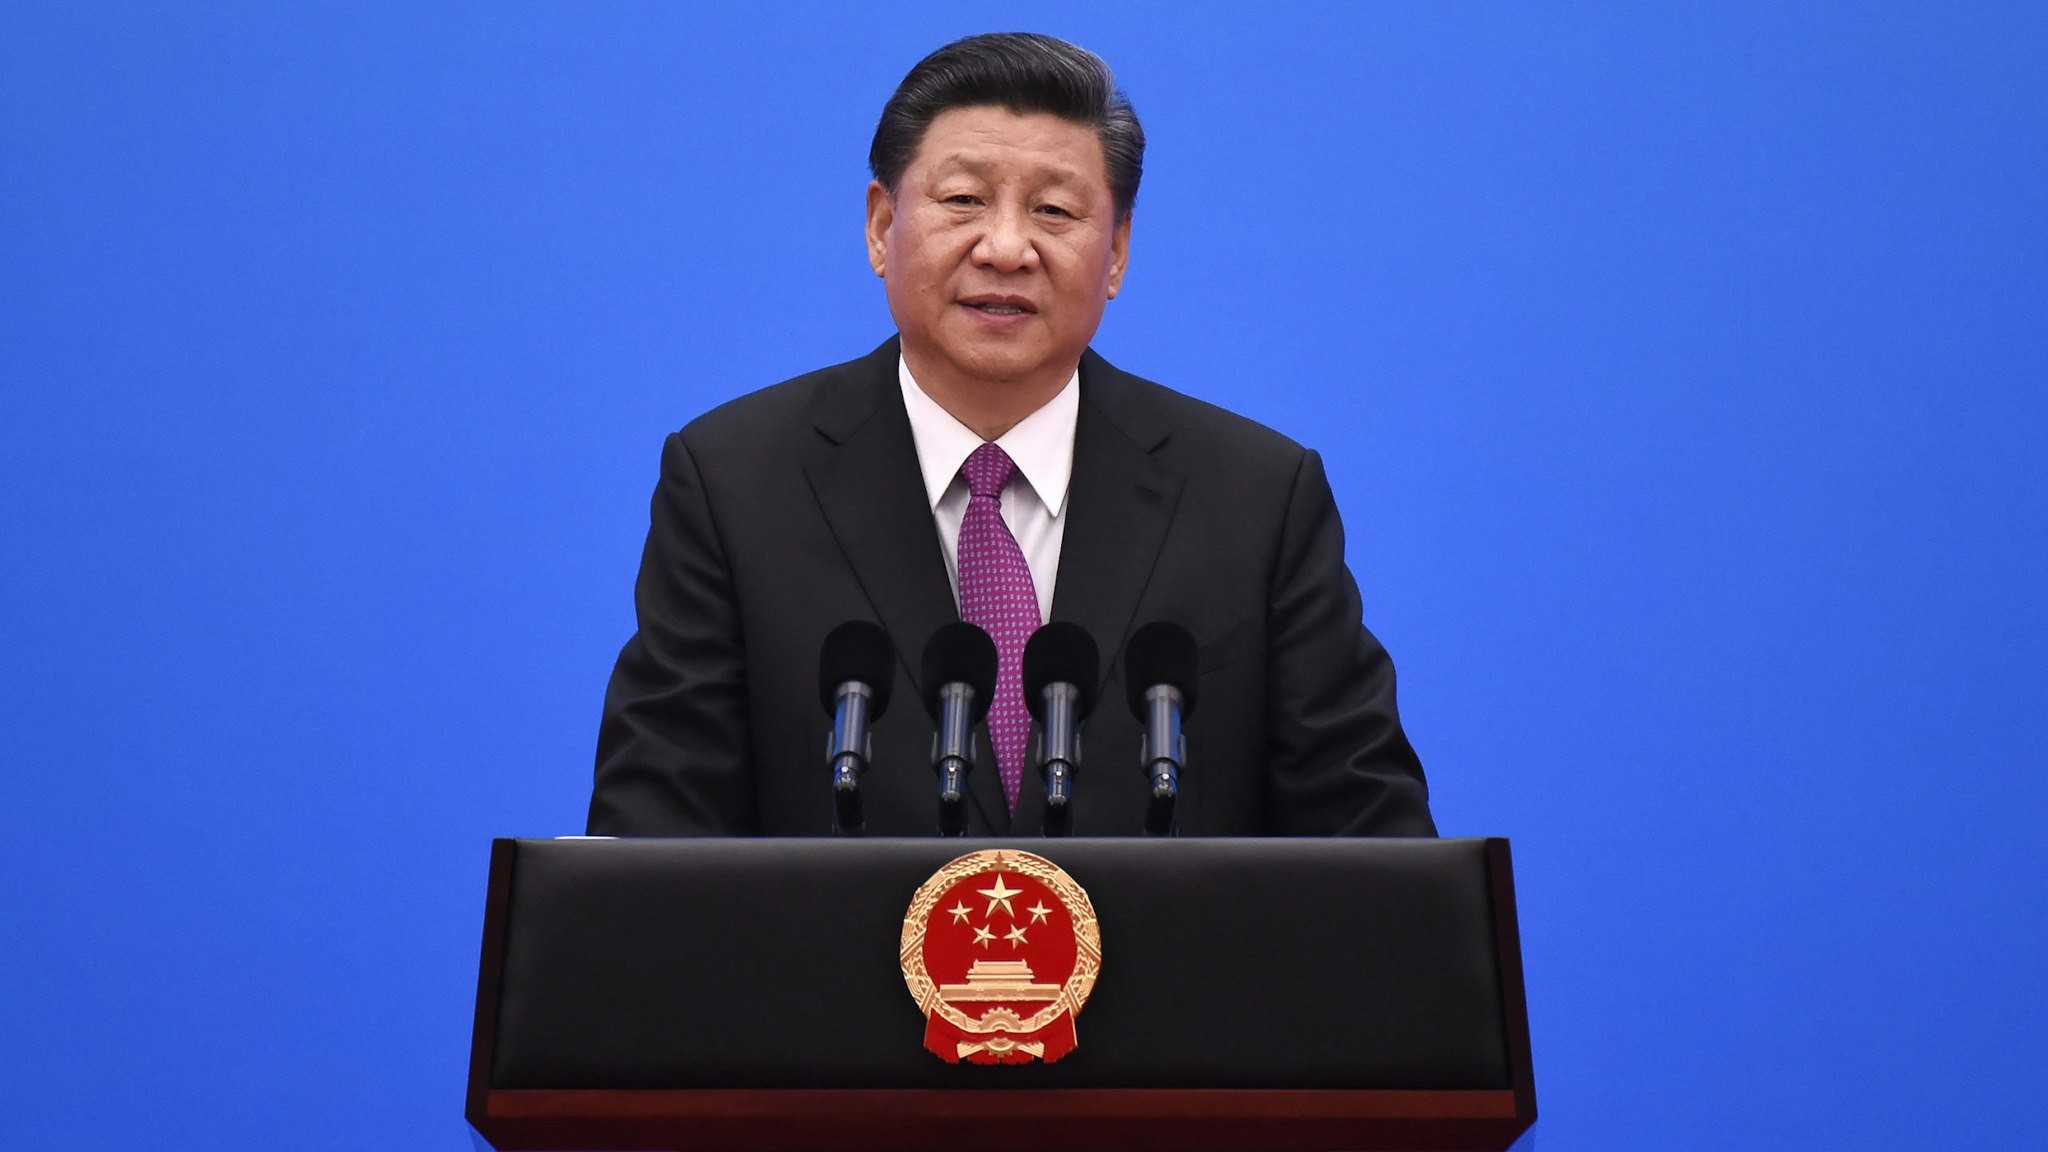 BEIJING, CHINA - APRIL 27: Chinese President Xi Jinping gives a speech at a press conference after the Belt and Road Forum at the China National Convention Center at the Yanqi Lake venue on April 27, 2019 in Beijing, China.